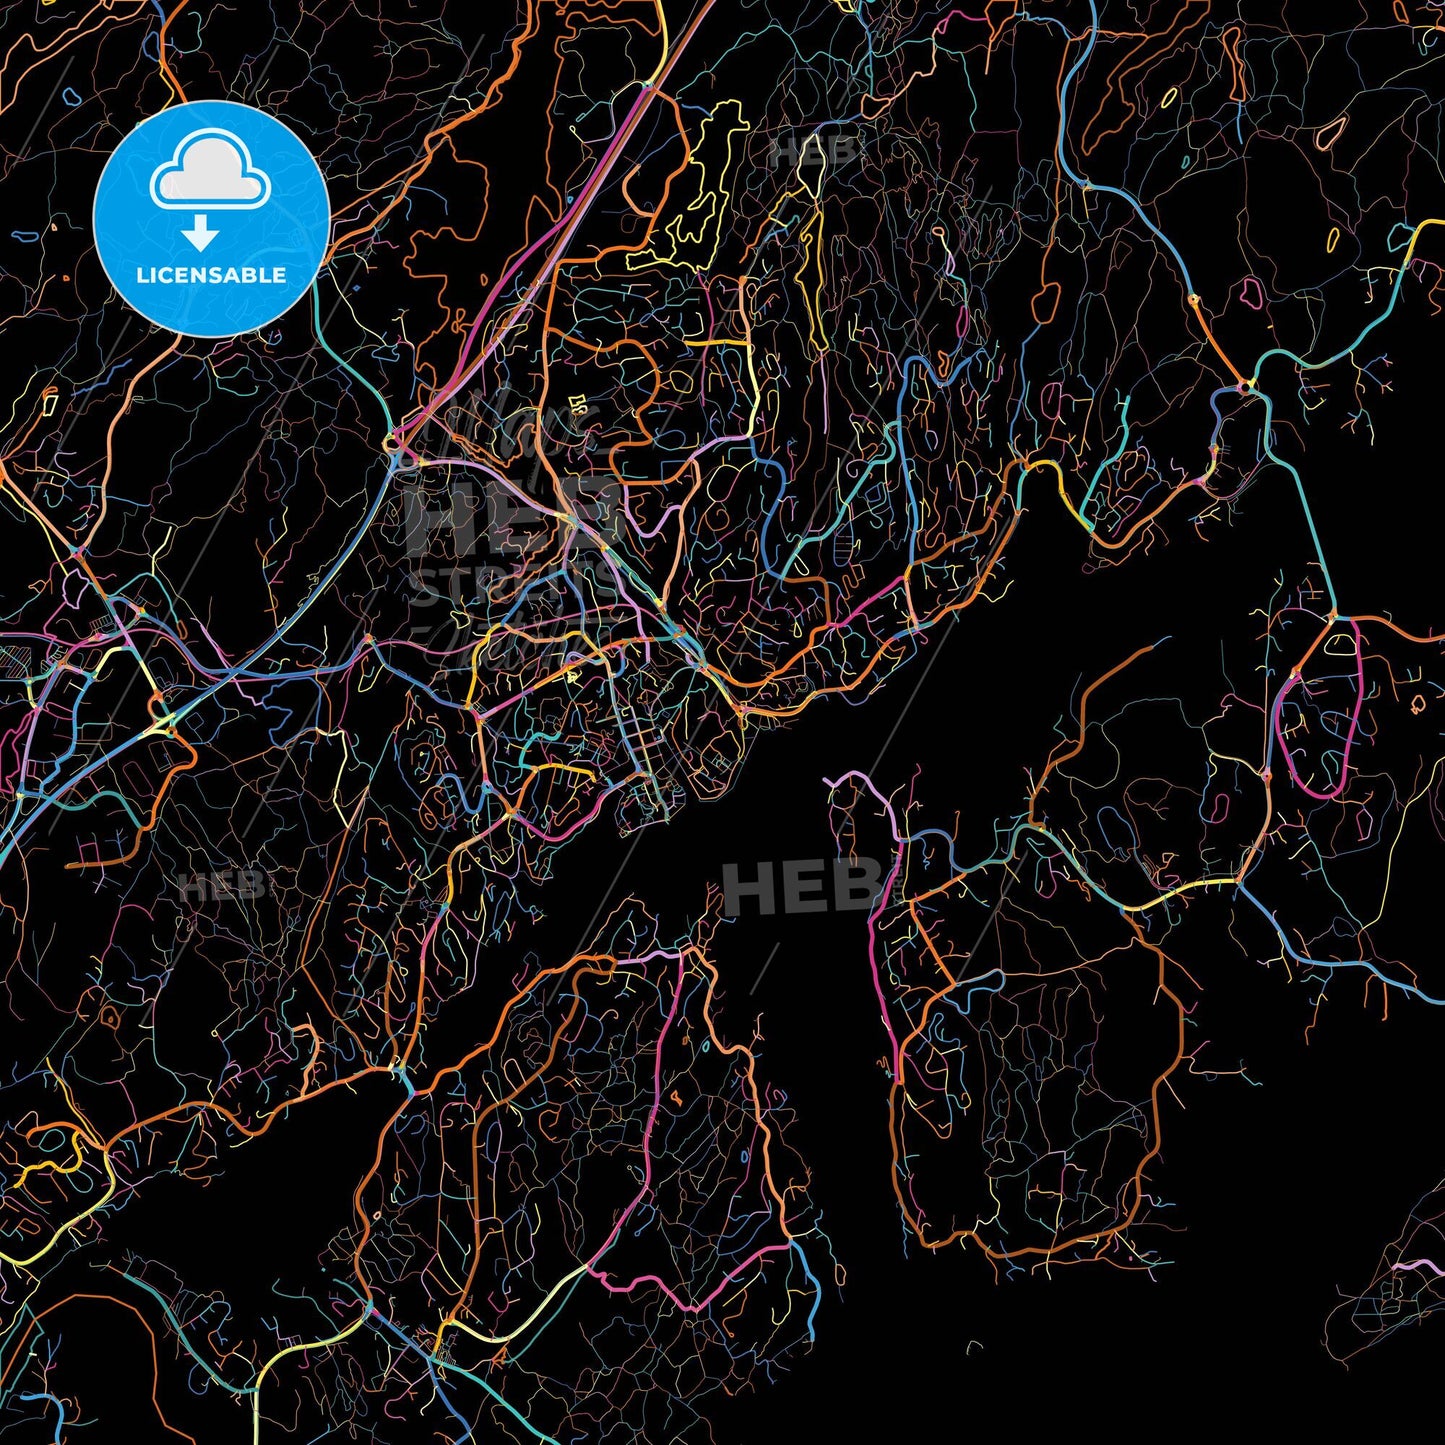 Arendal, Aust-Agder, Norway, colorful city map on black background